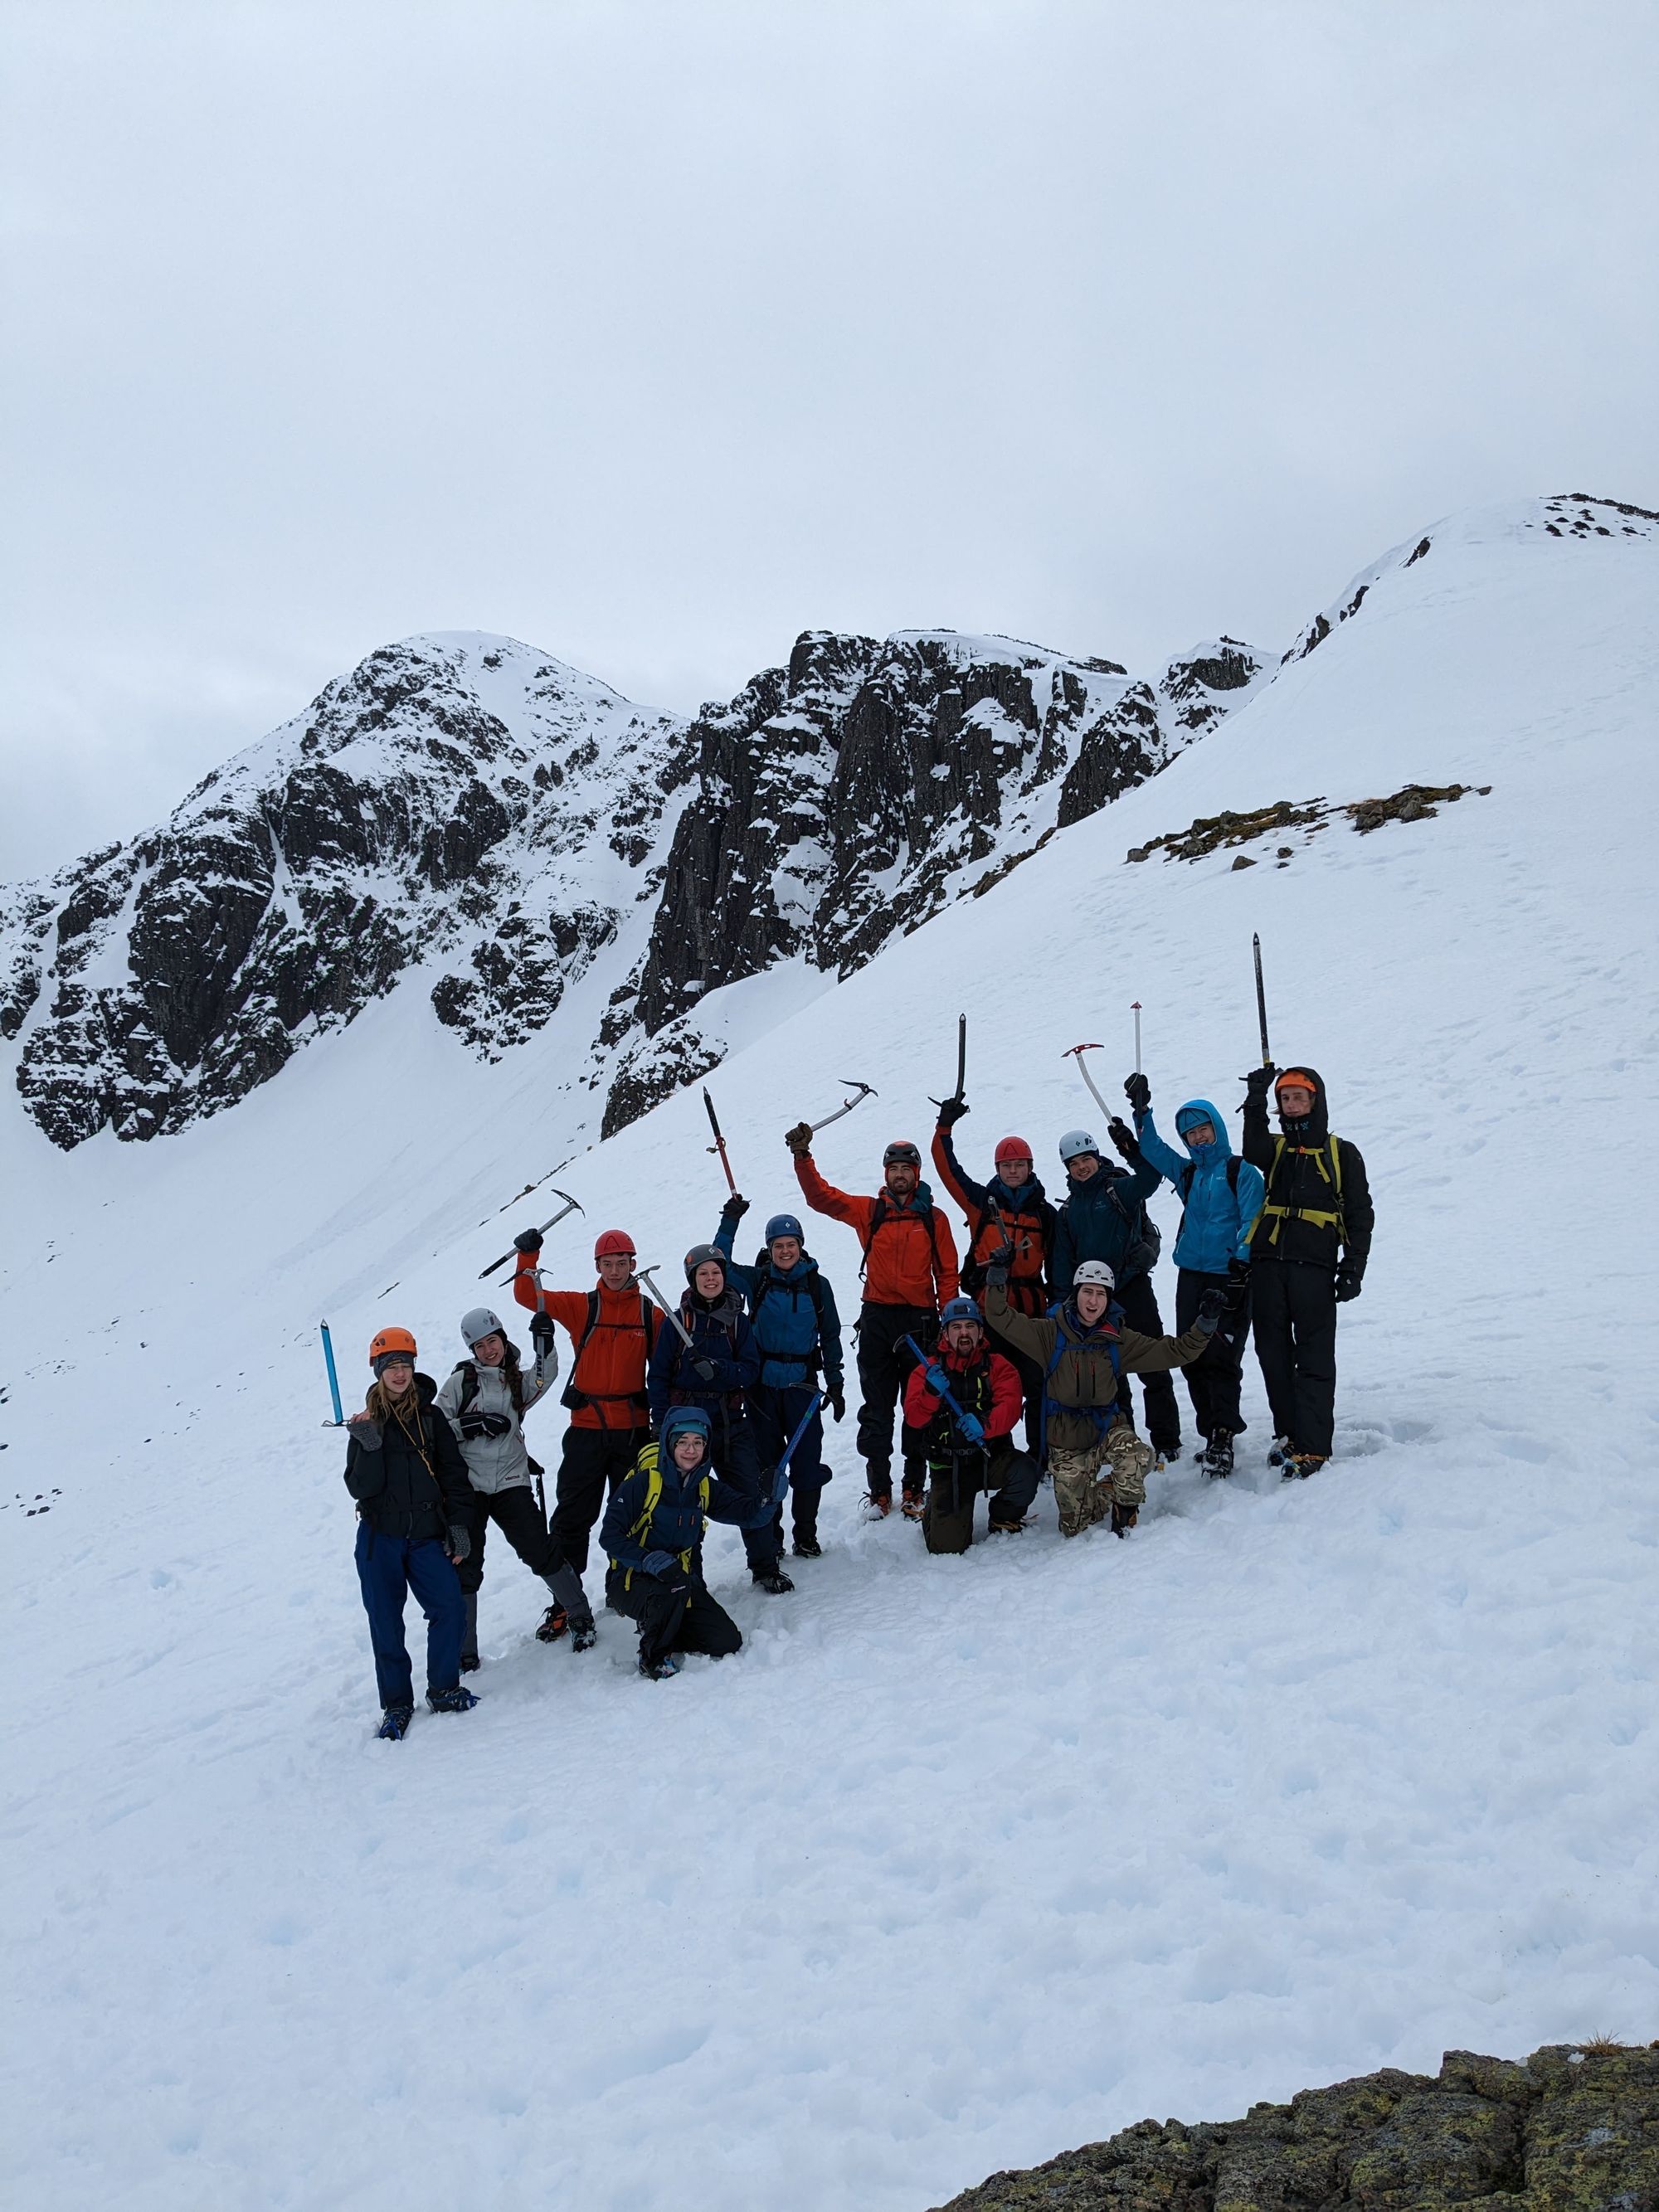 A group of people on a snowy mountain

Description automatically generated with medium confidence